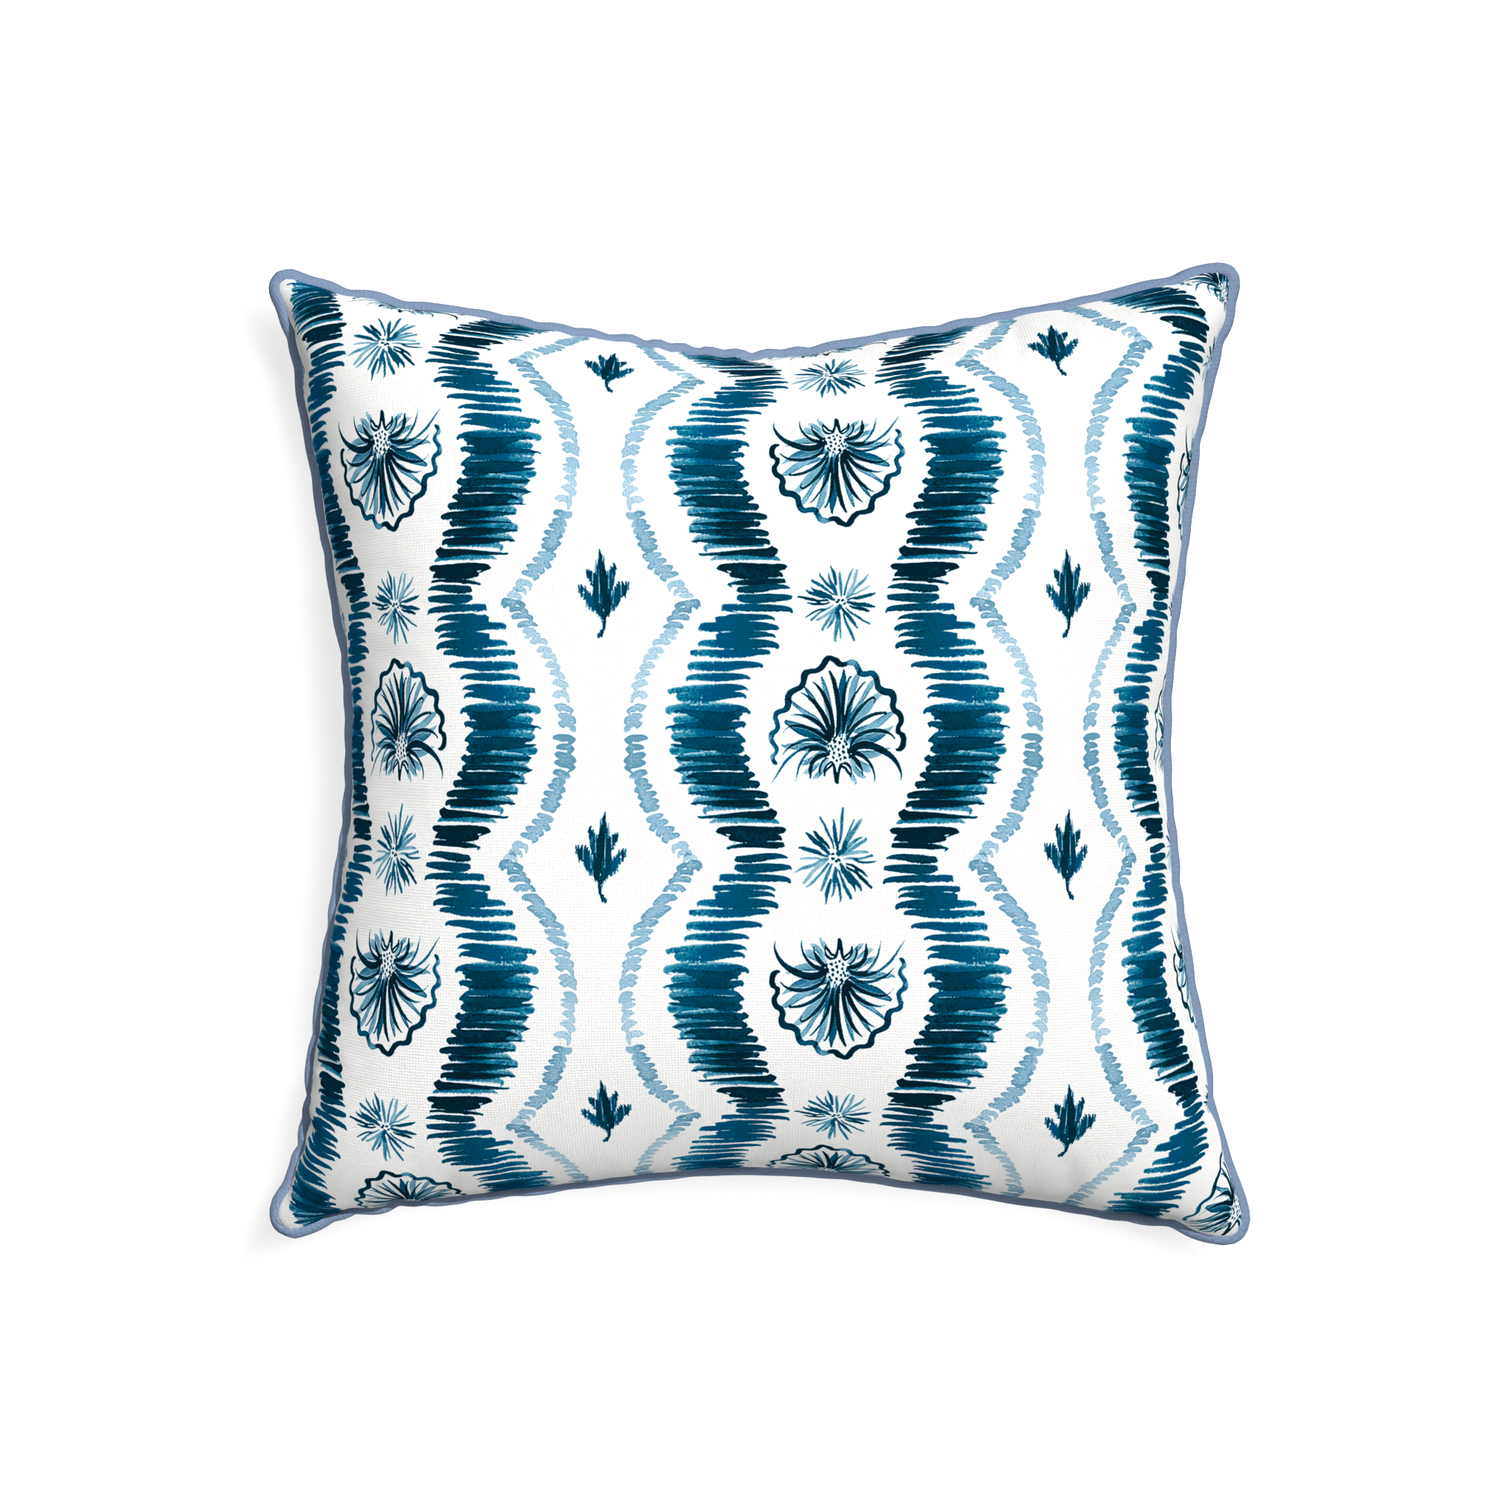 22-square alice custom blue ikatpillow with sky piping on white background